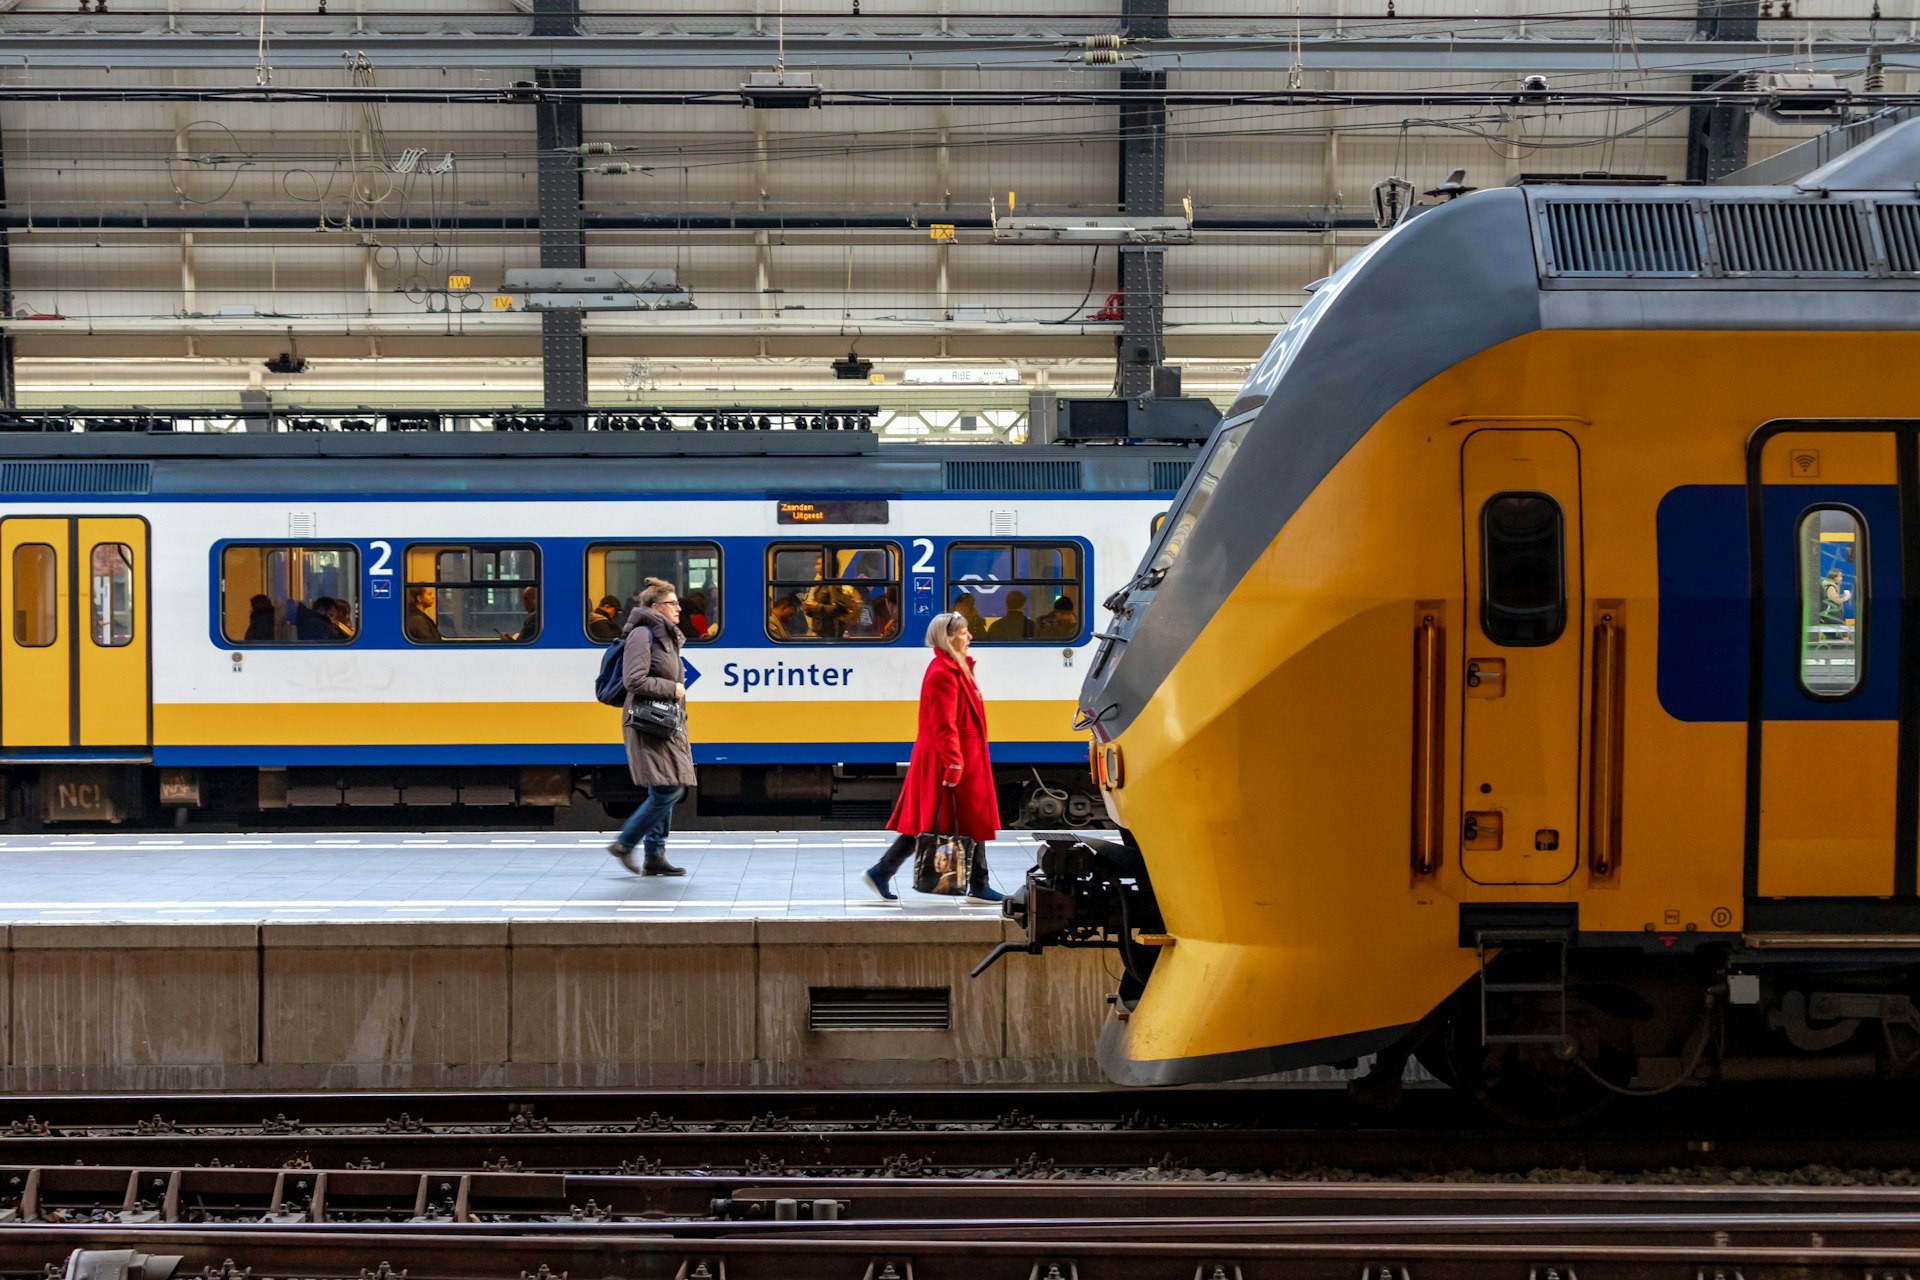 Amsterdam centraal train station with people traveling by train and sprinter, NS Intercity train at the main station